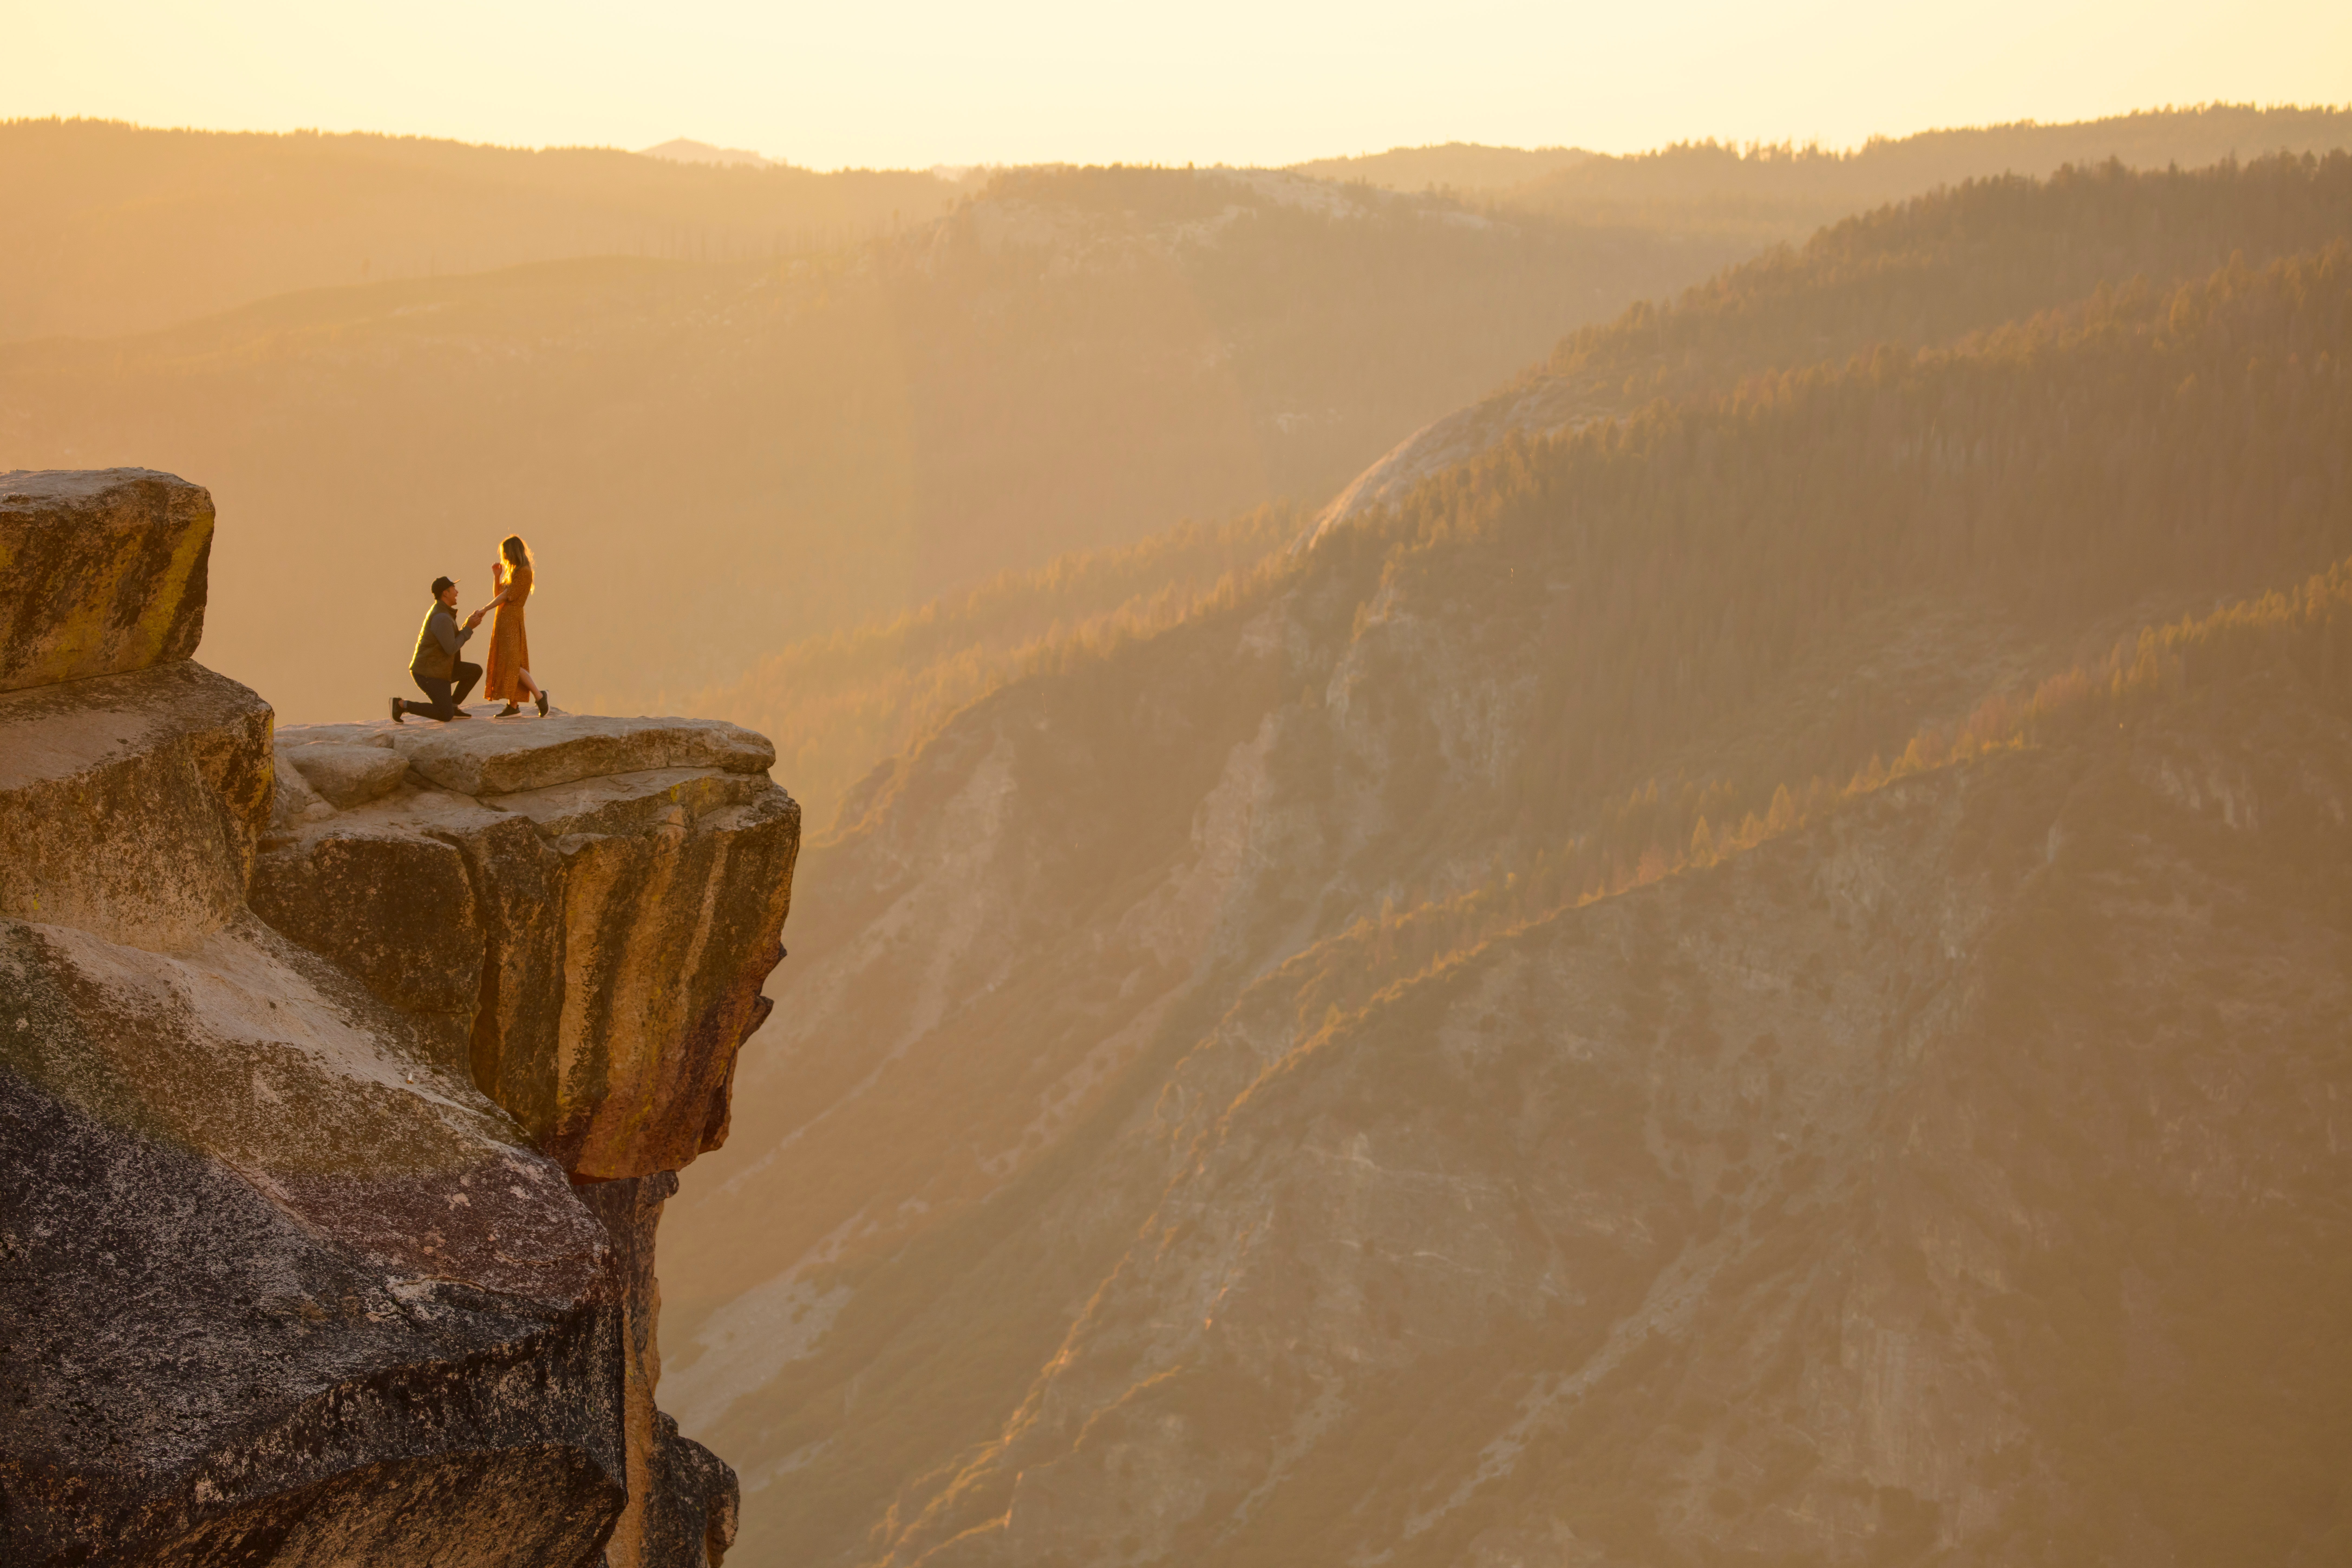 Man proposing on the edge of a cliff